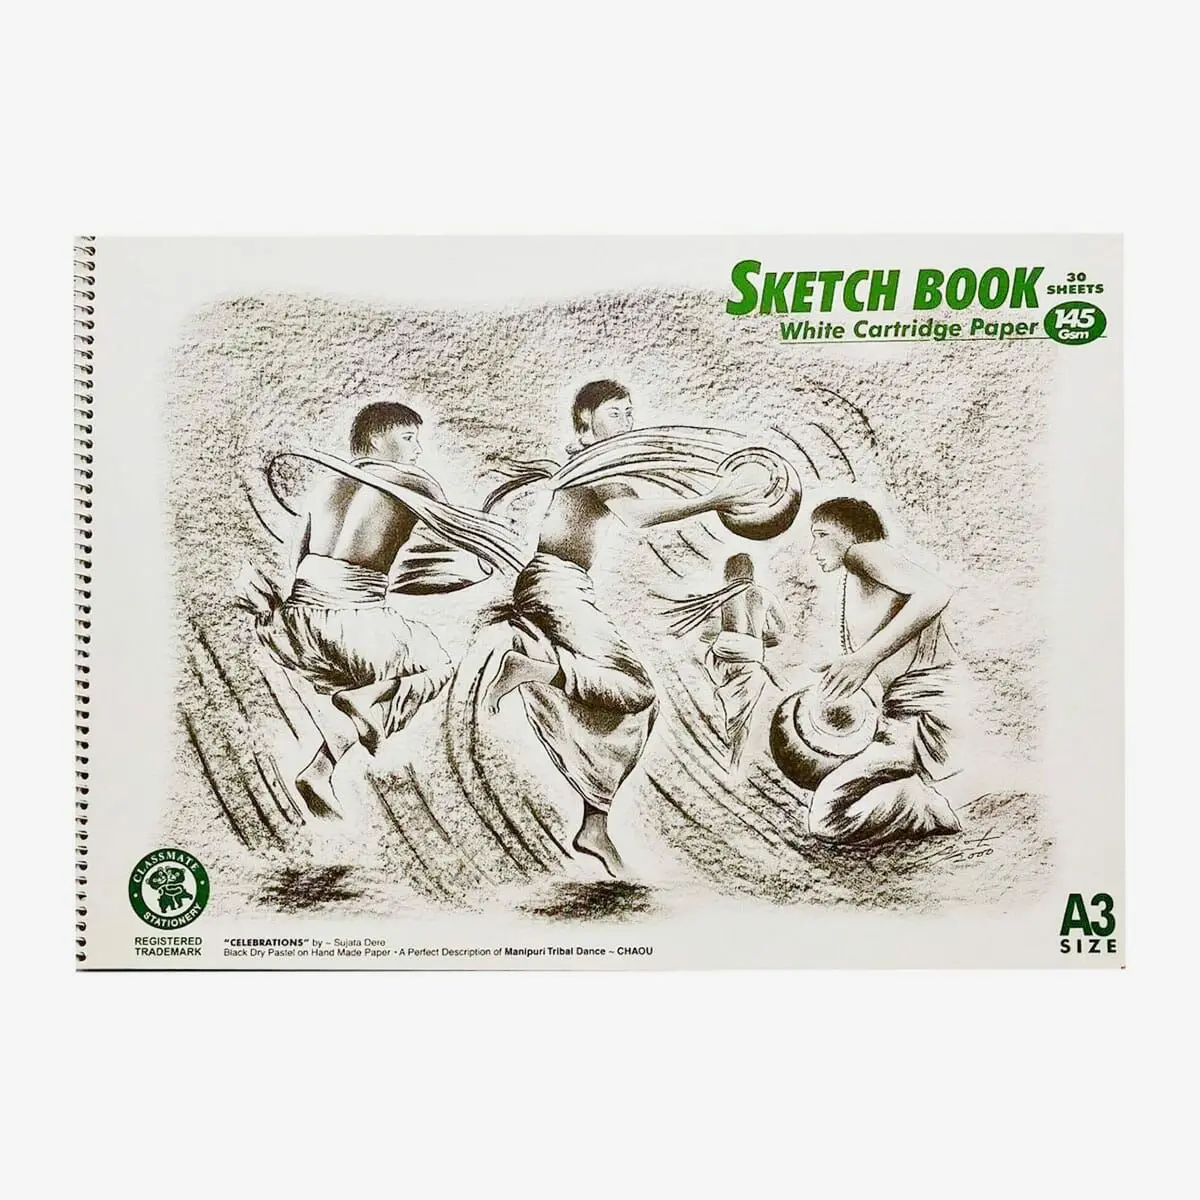 Share more than 109 classmate sketching book best